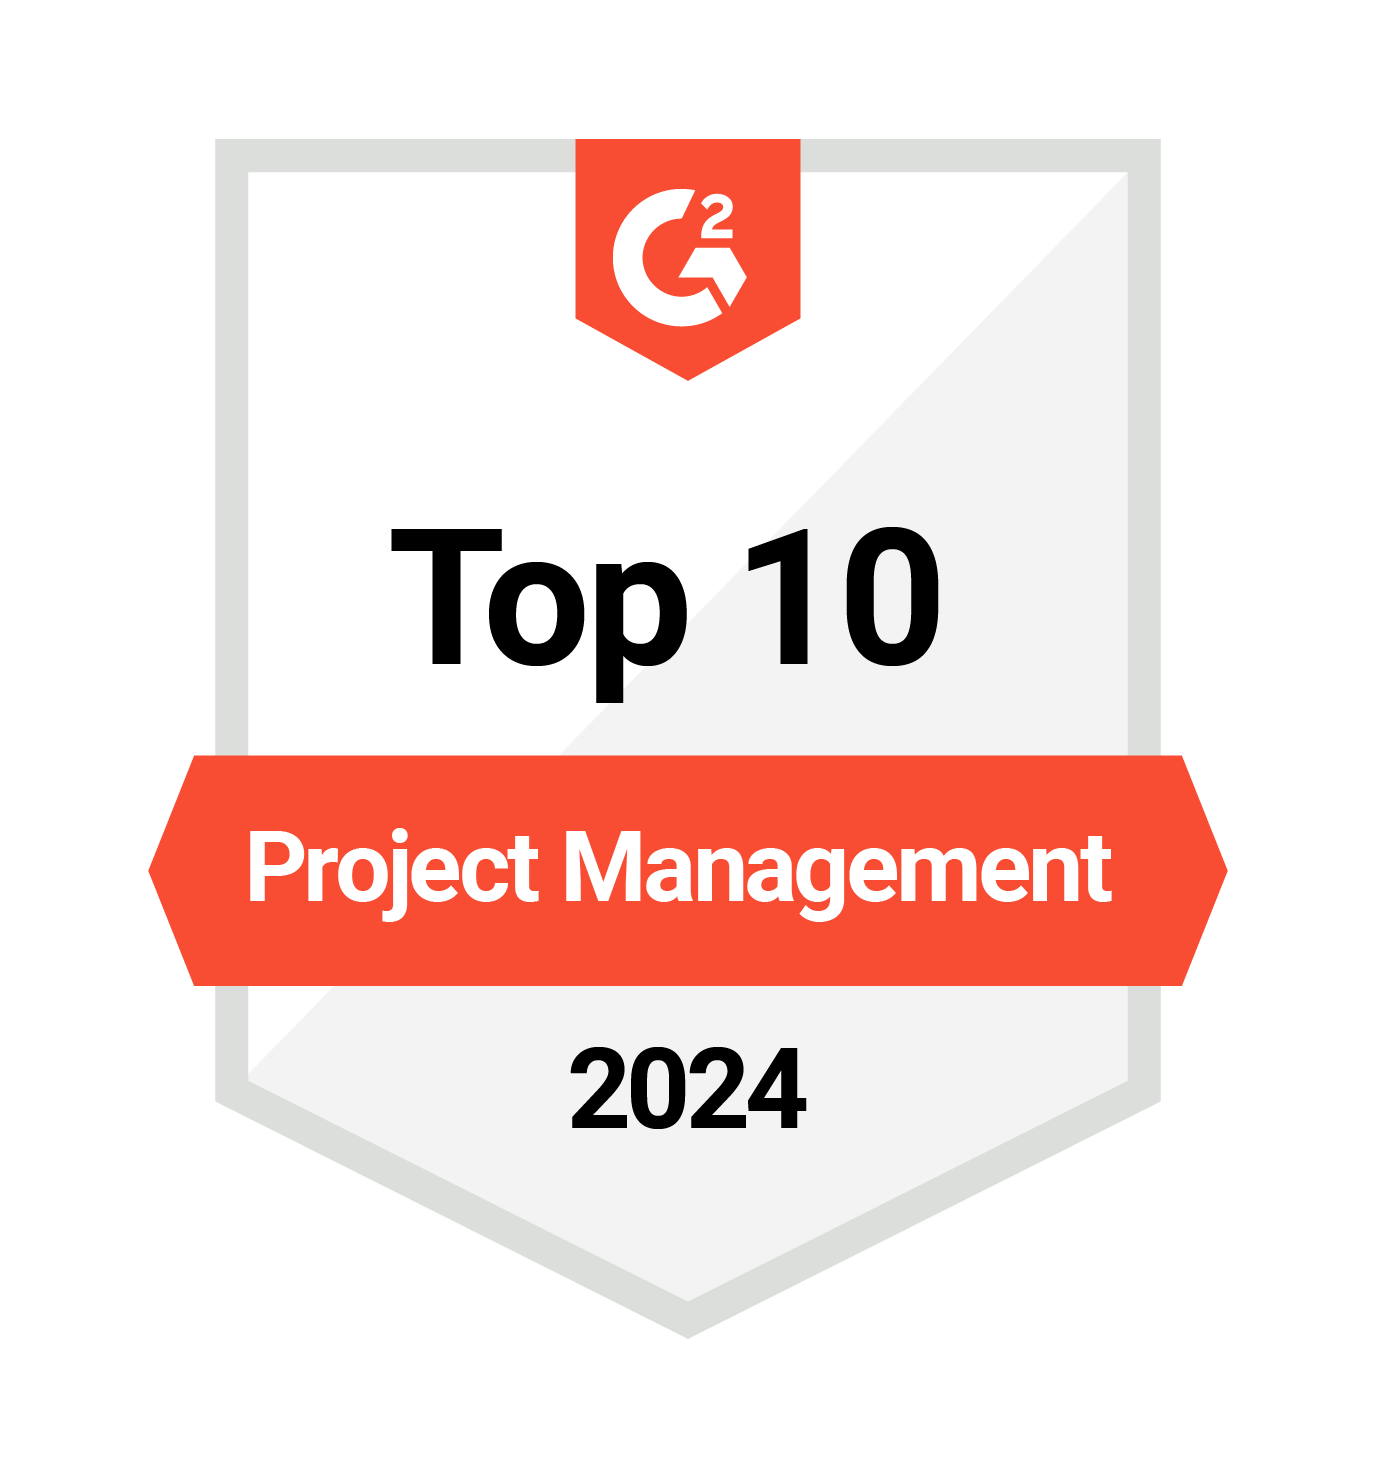 G2 Top 10 in Project Management